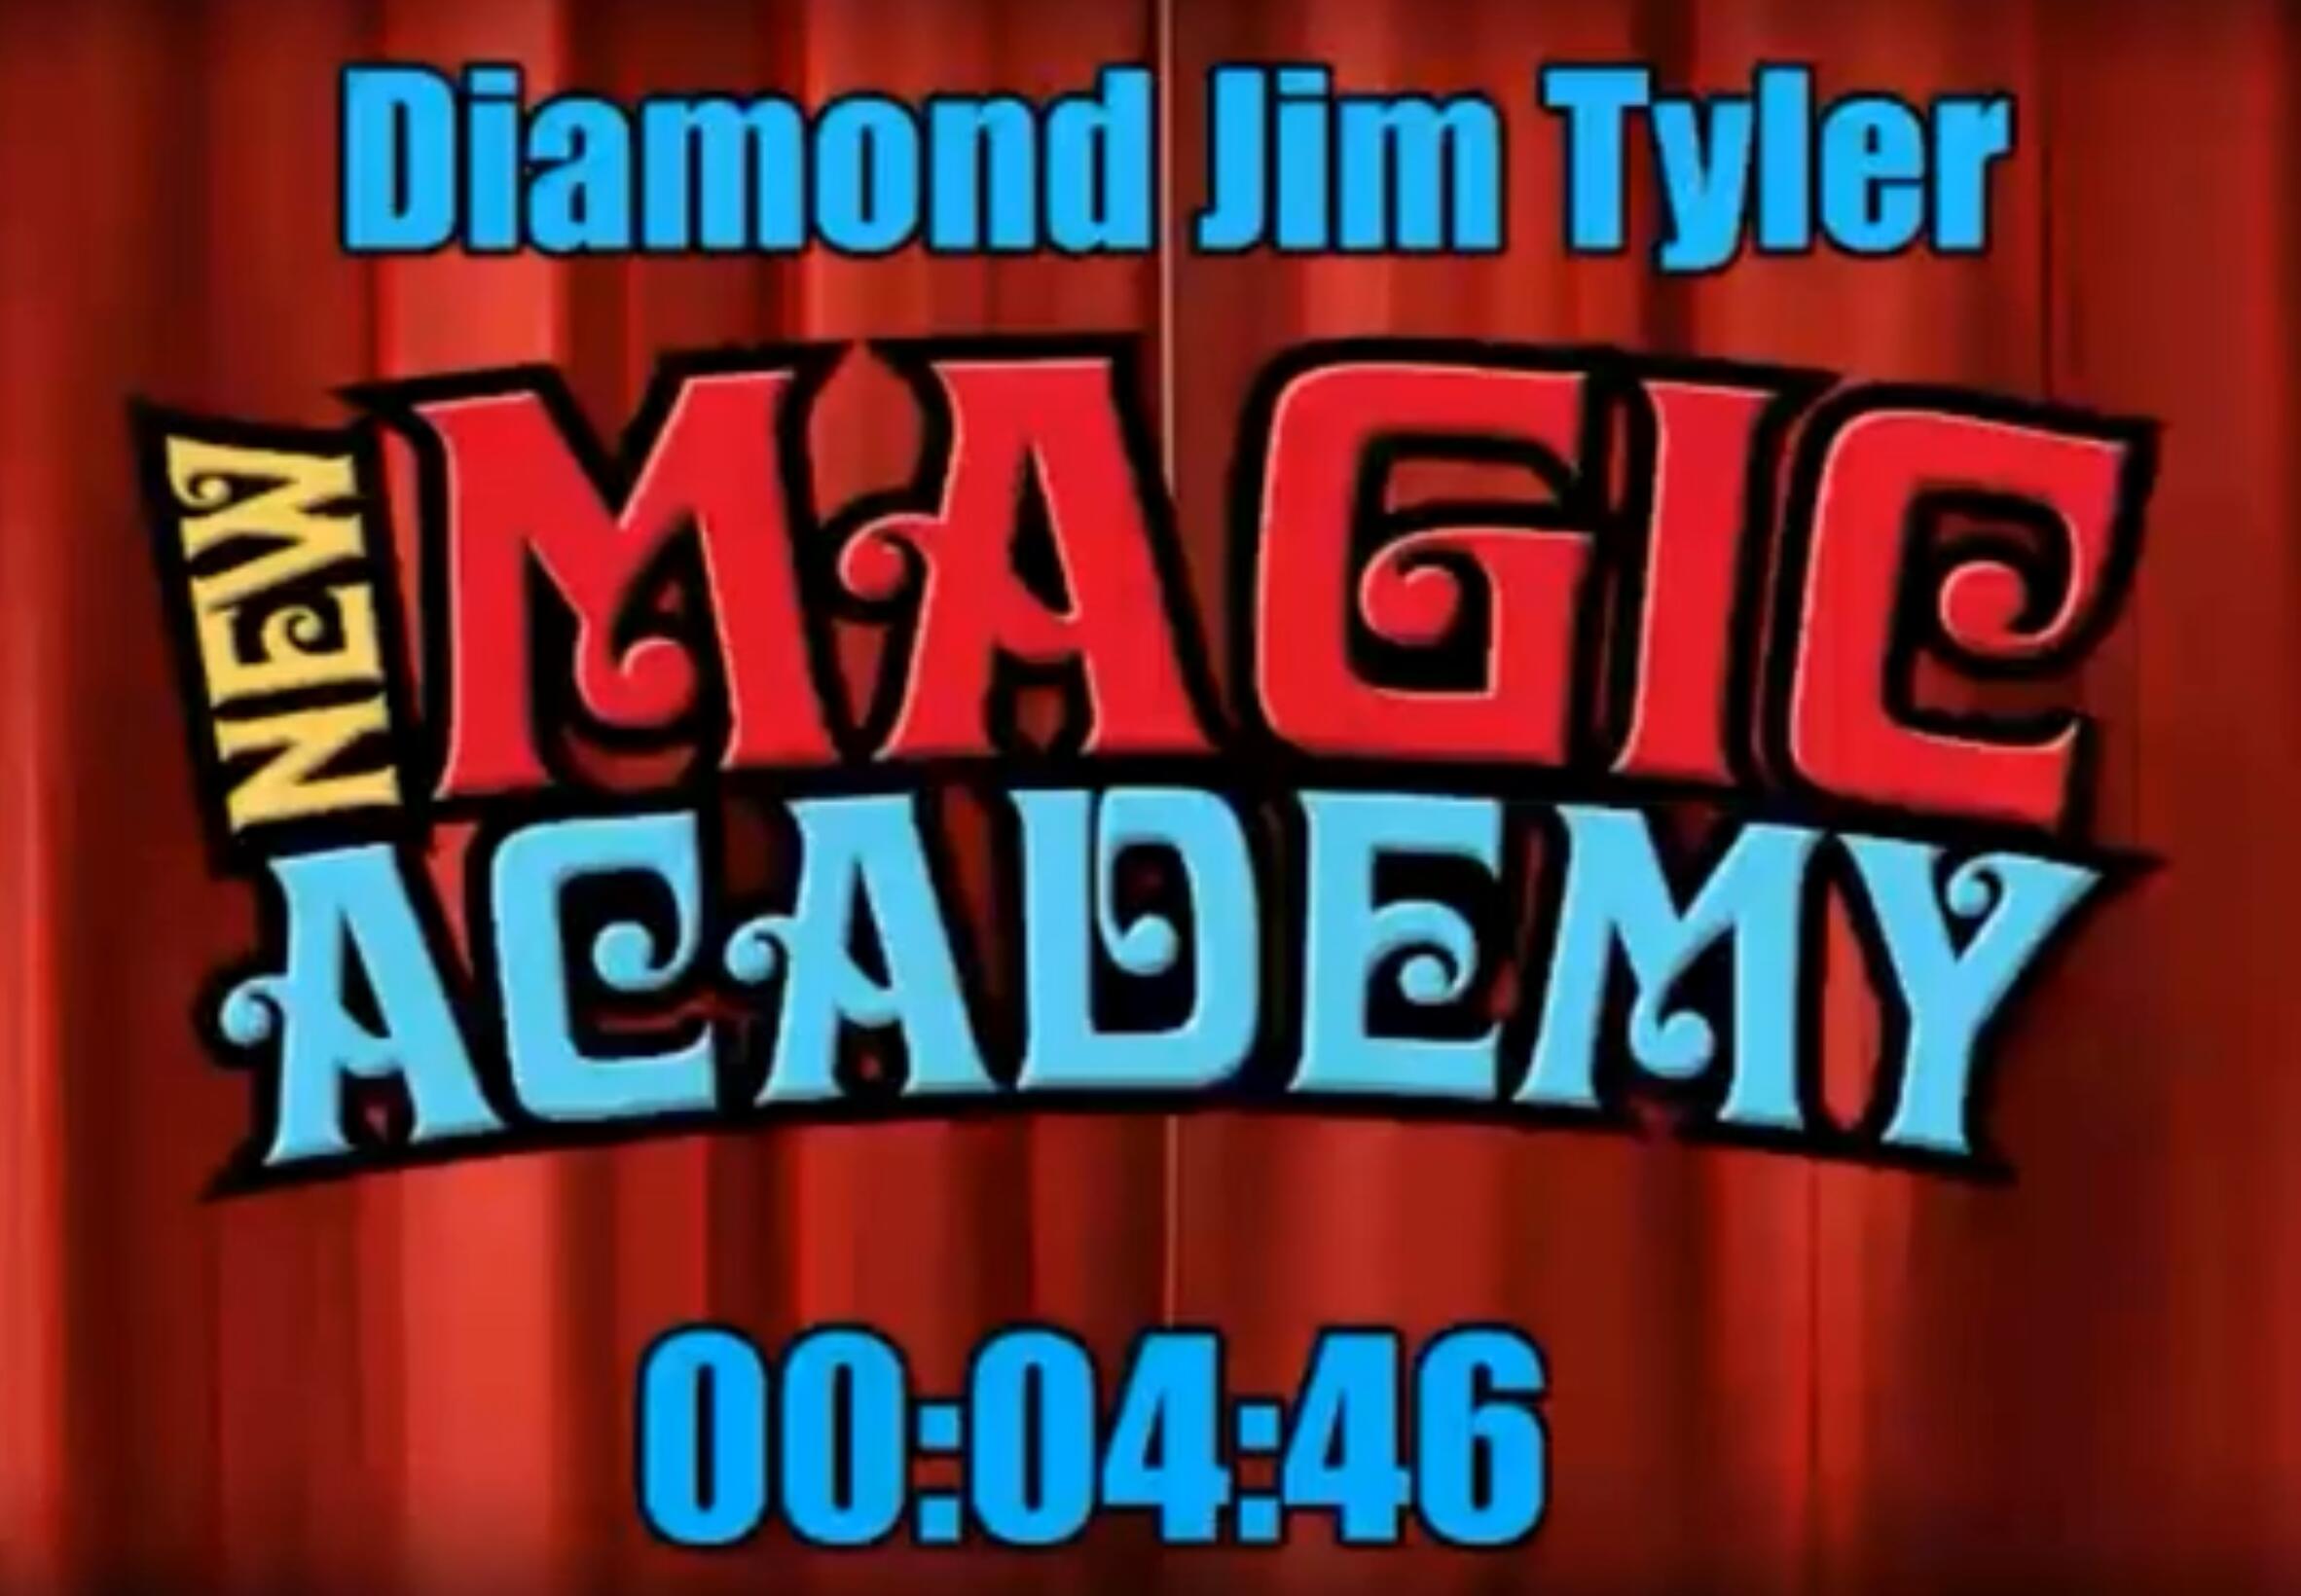 New Magic Academy Lecture by Diamond Jim Tyler (Video Download)